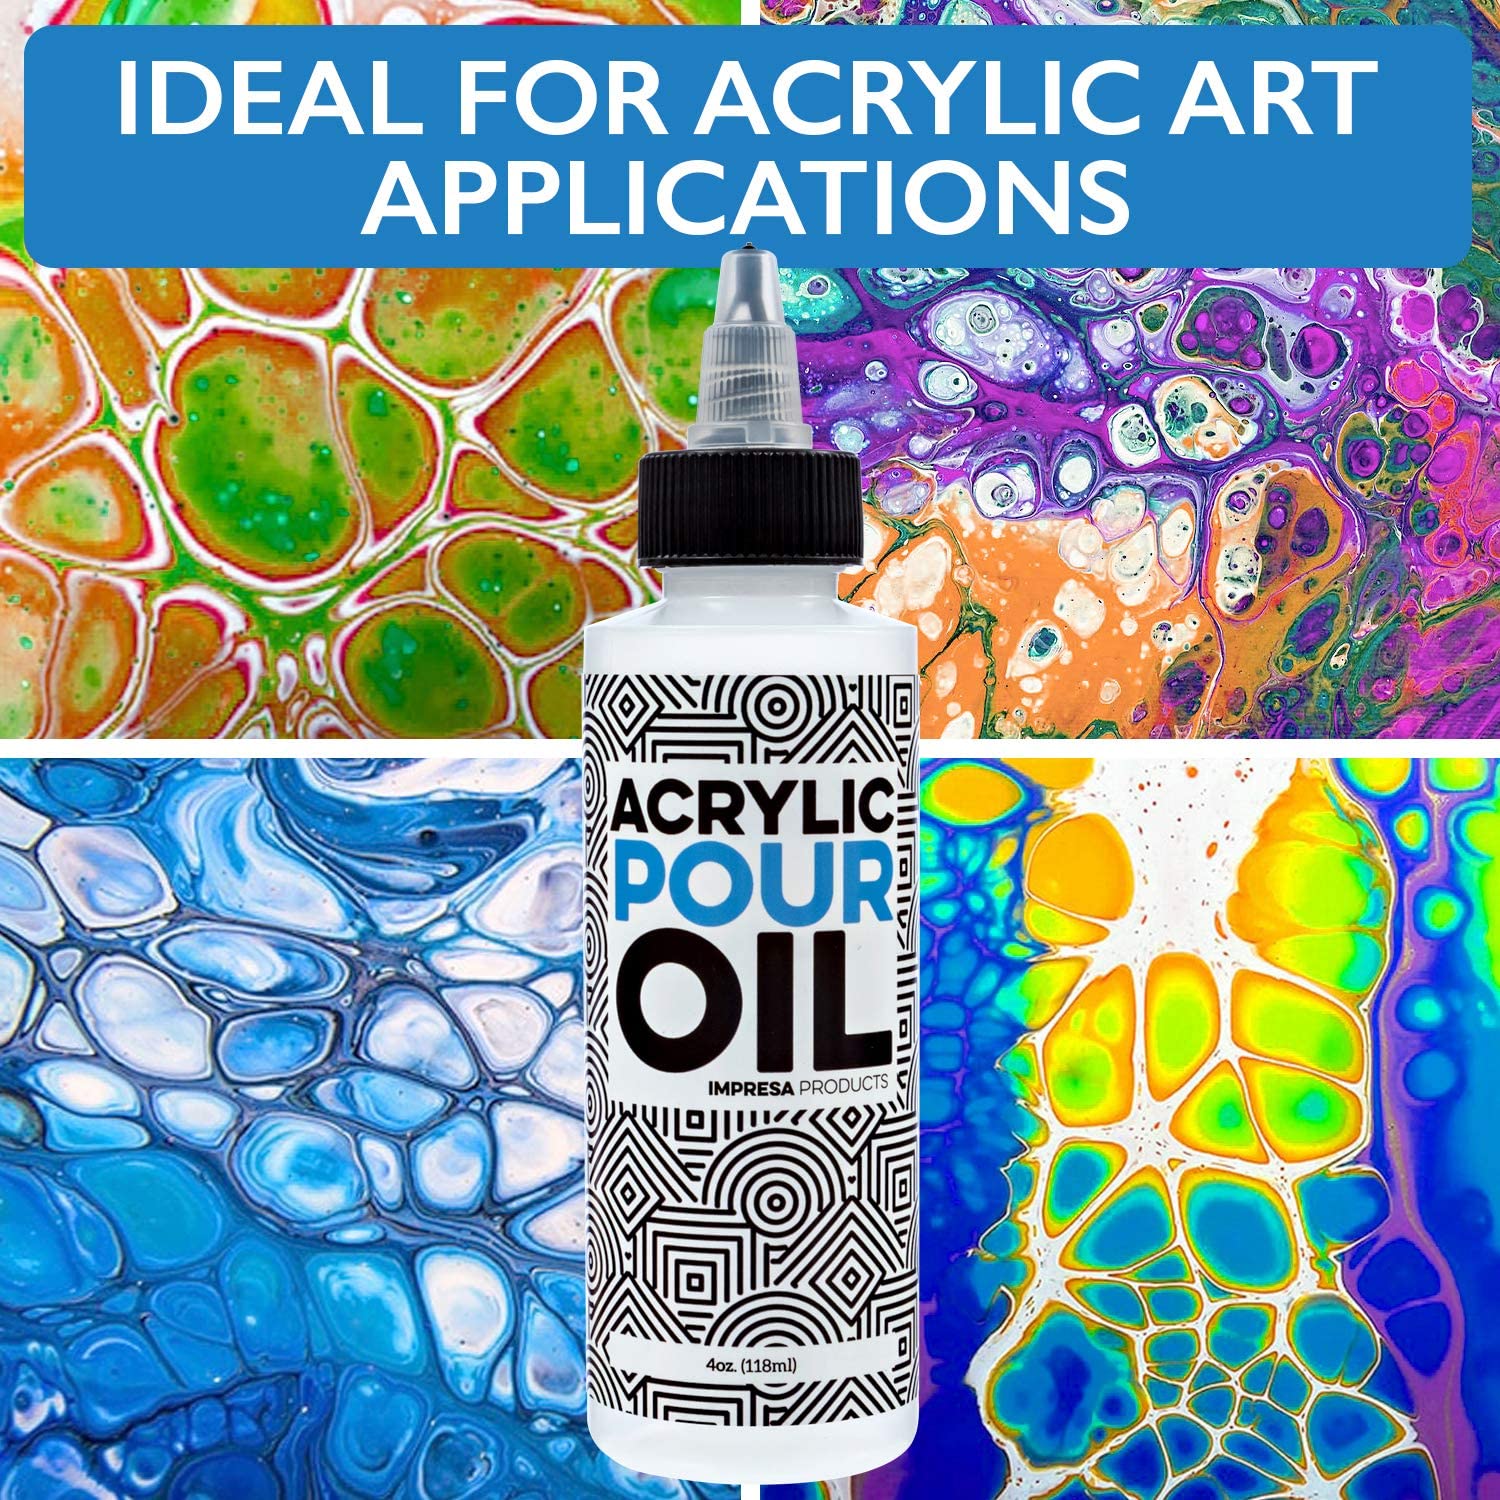 Acrylic Pouring Oil - 100% Silicone - Art Applications - 4 Ounces (Includes  Pipette) – Impresa Products